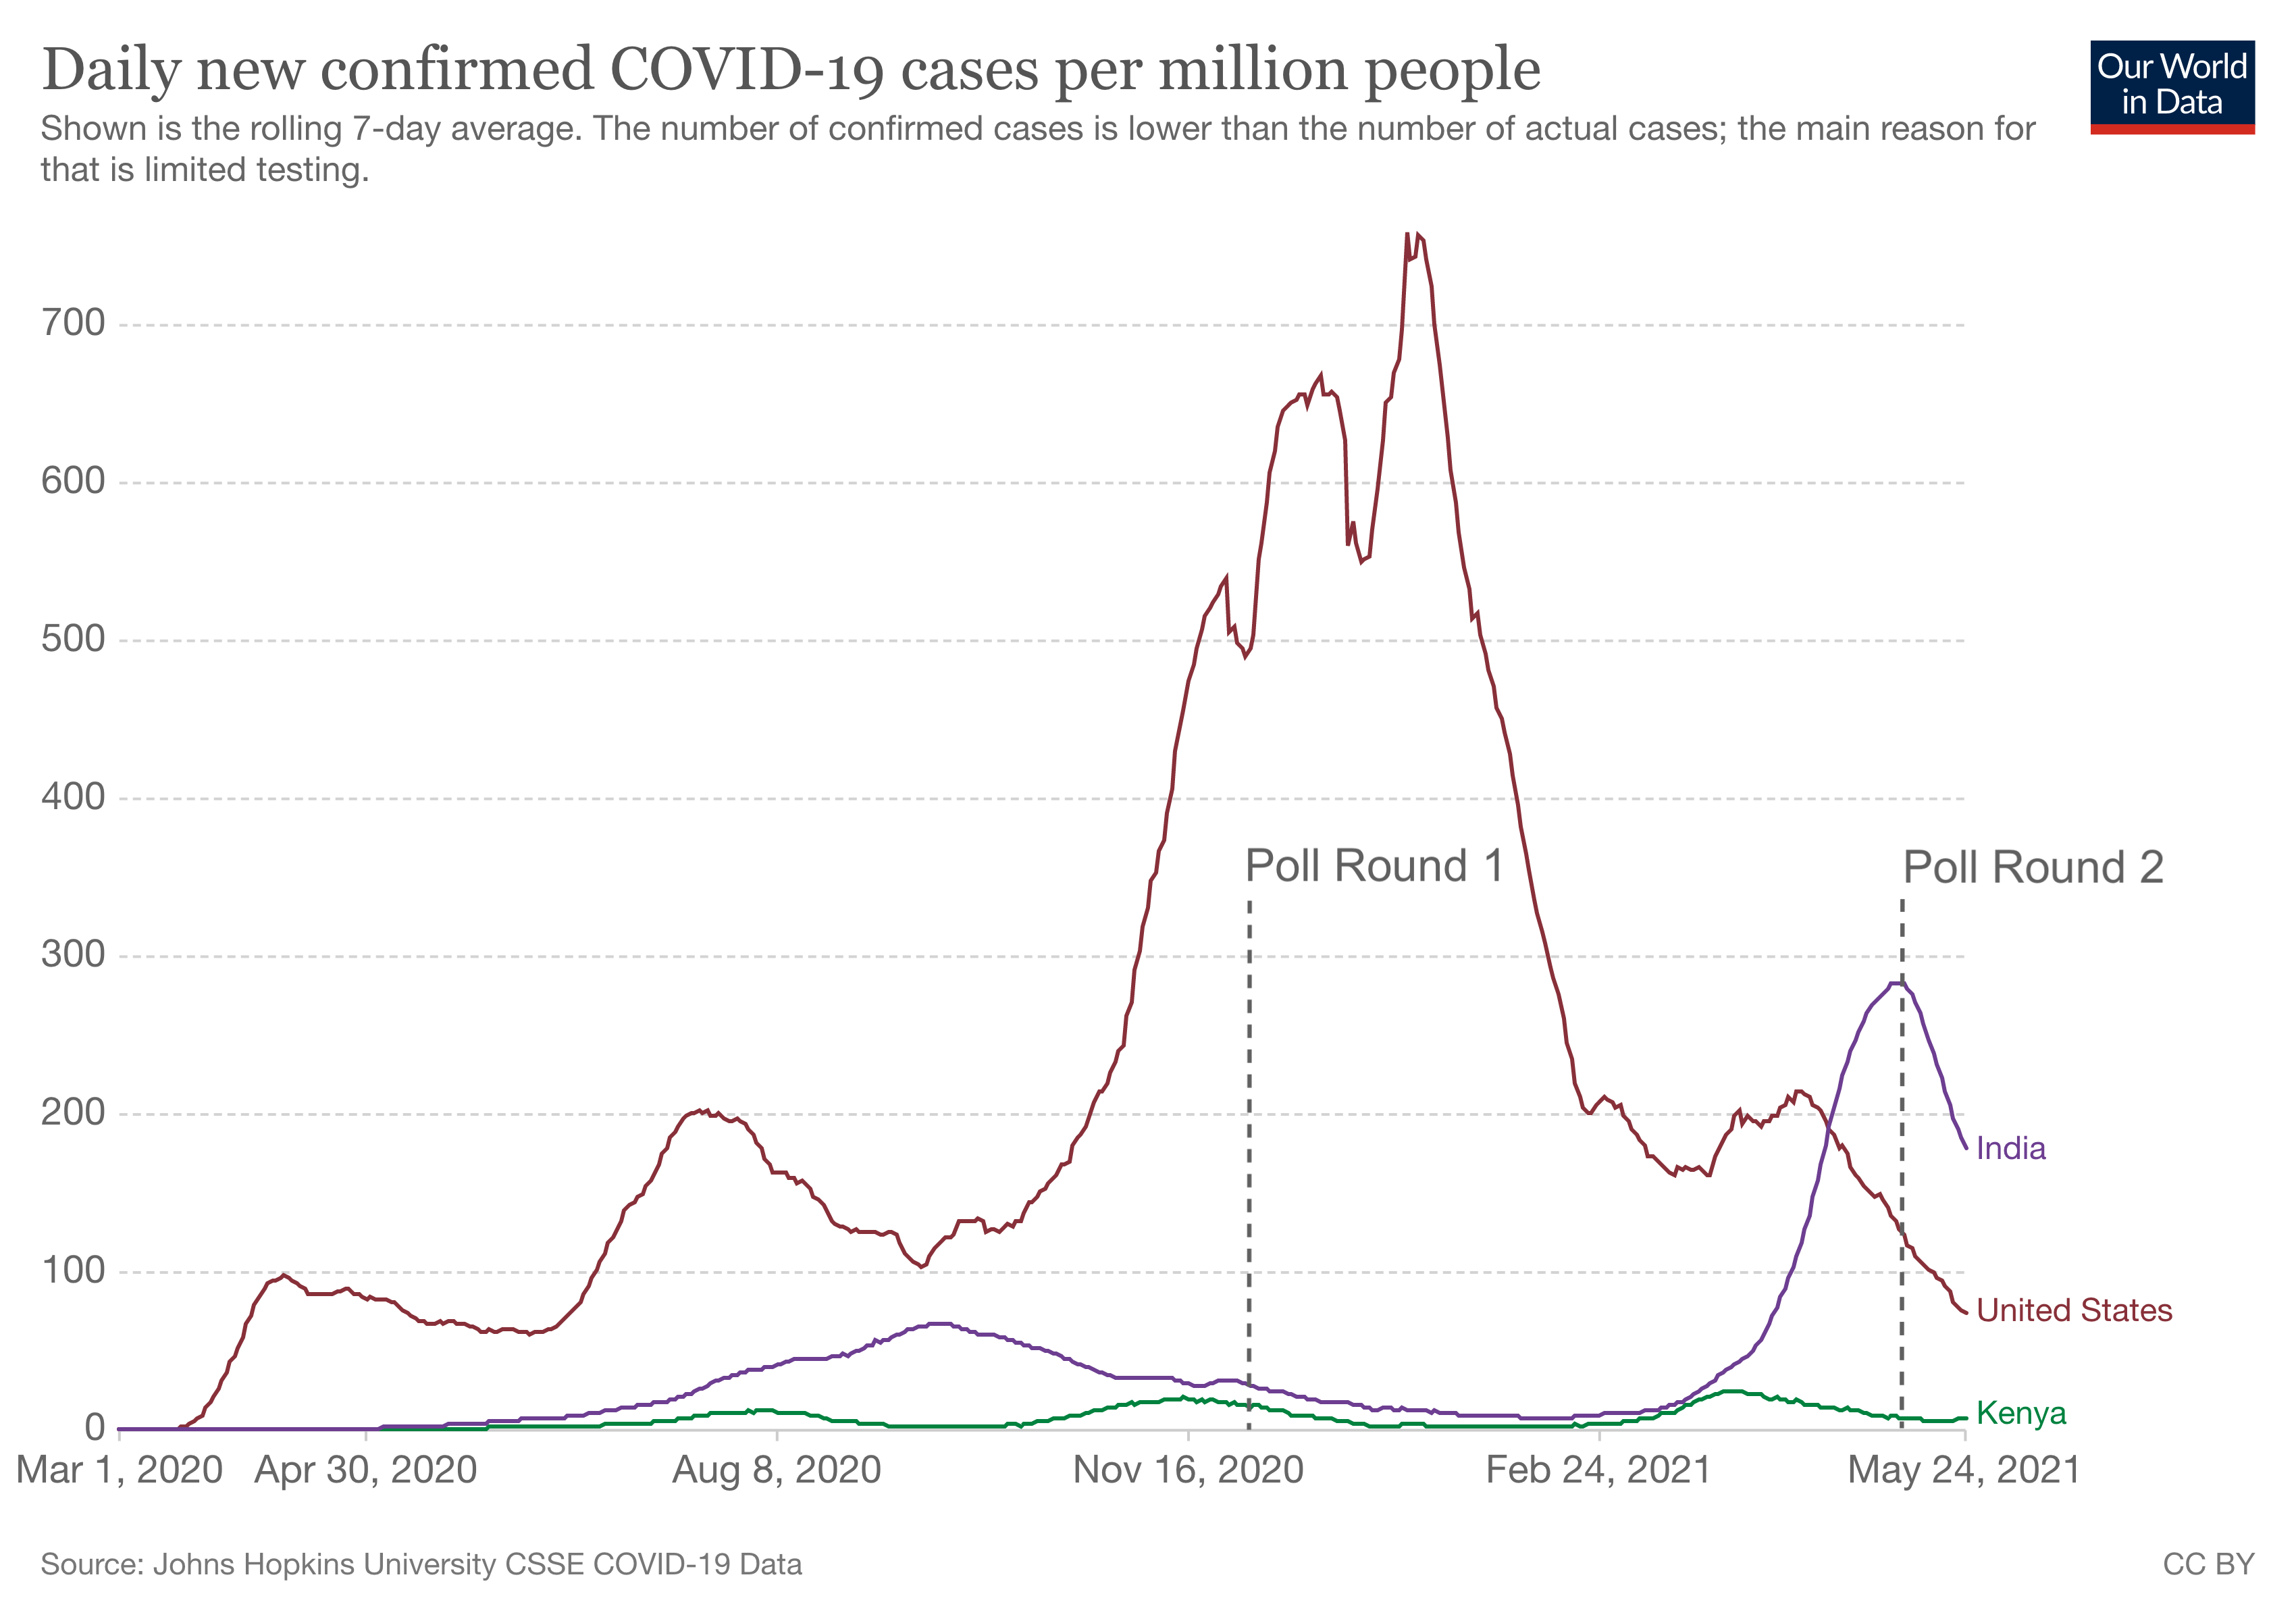 Daily new confirmed COVID-19 cases per million people. Data from JHU CSSE. Graph by Our World in Data, https://ourworldindata.org/covid-cases.